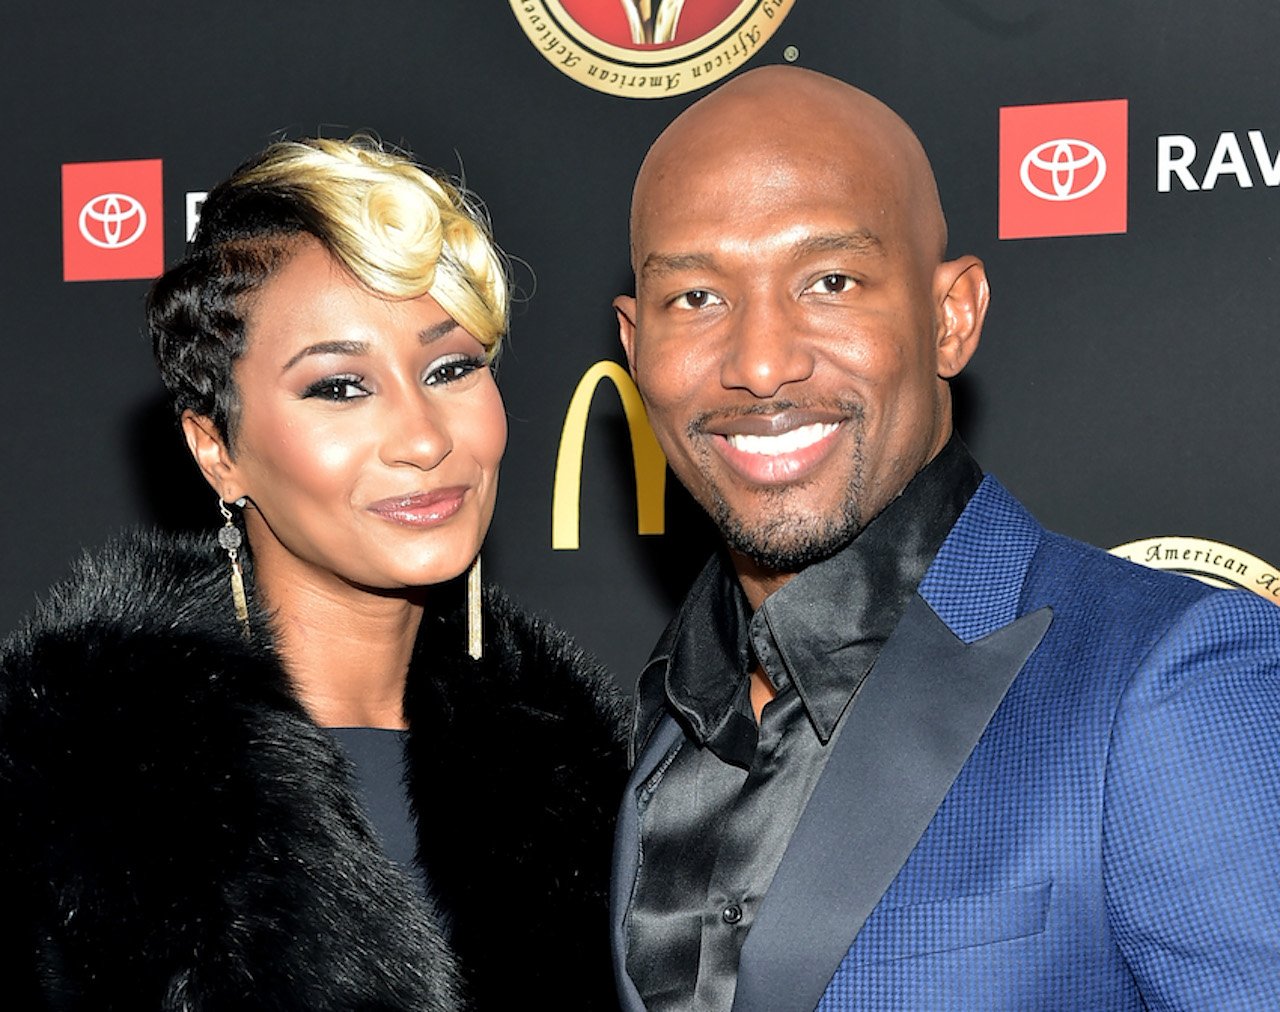 Melody and Martell Holt smile together on the red carpet